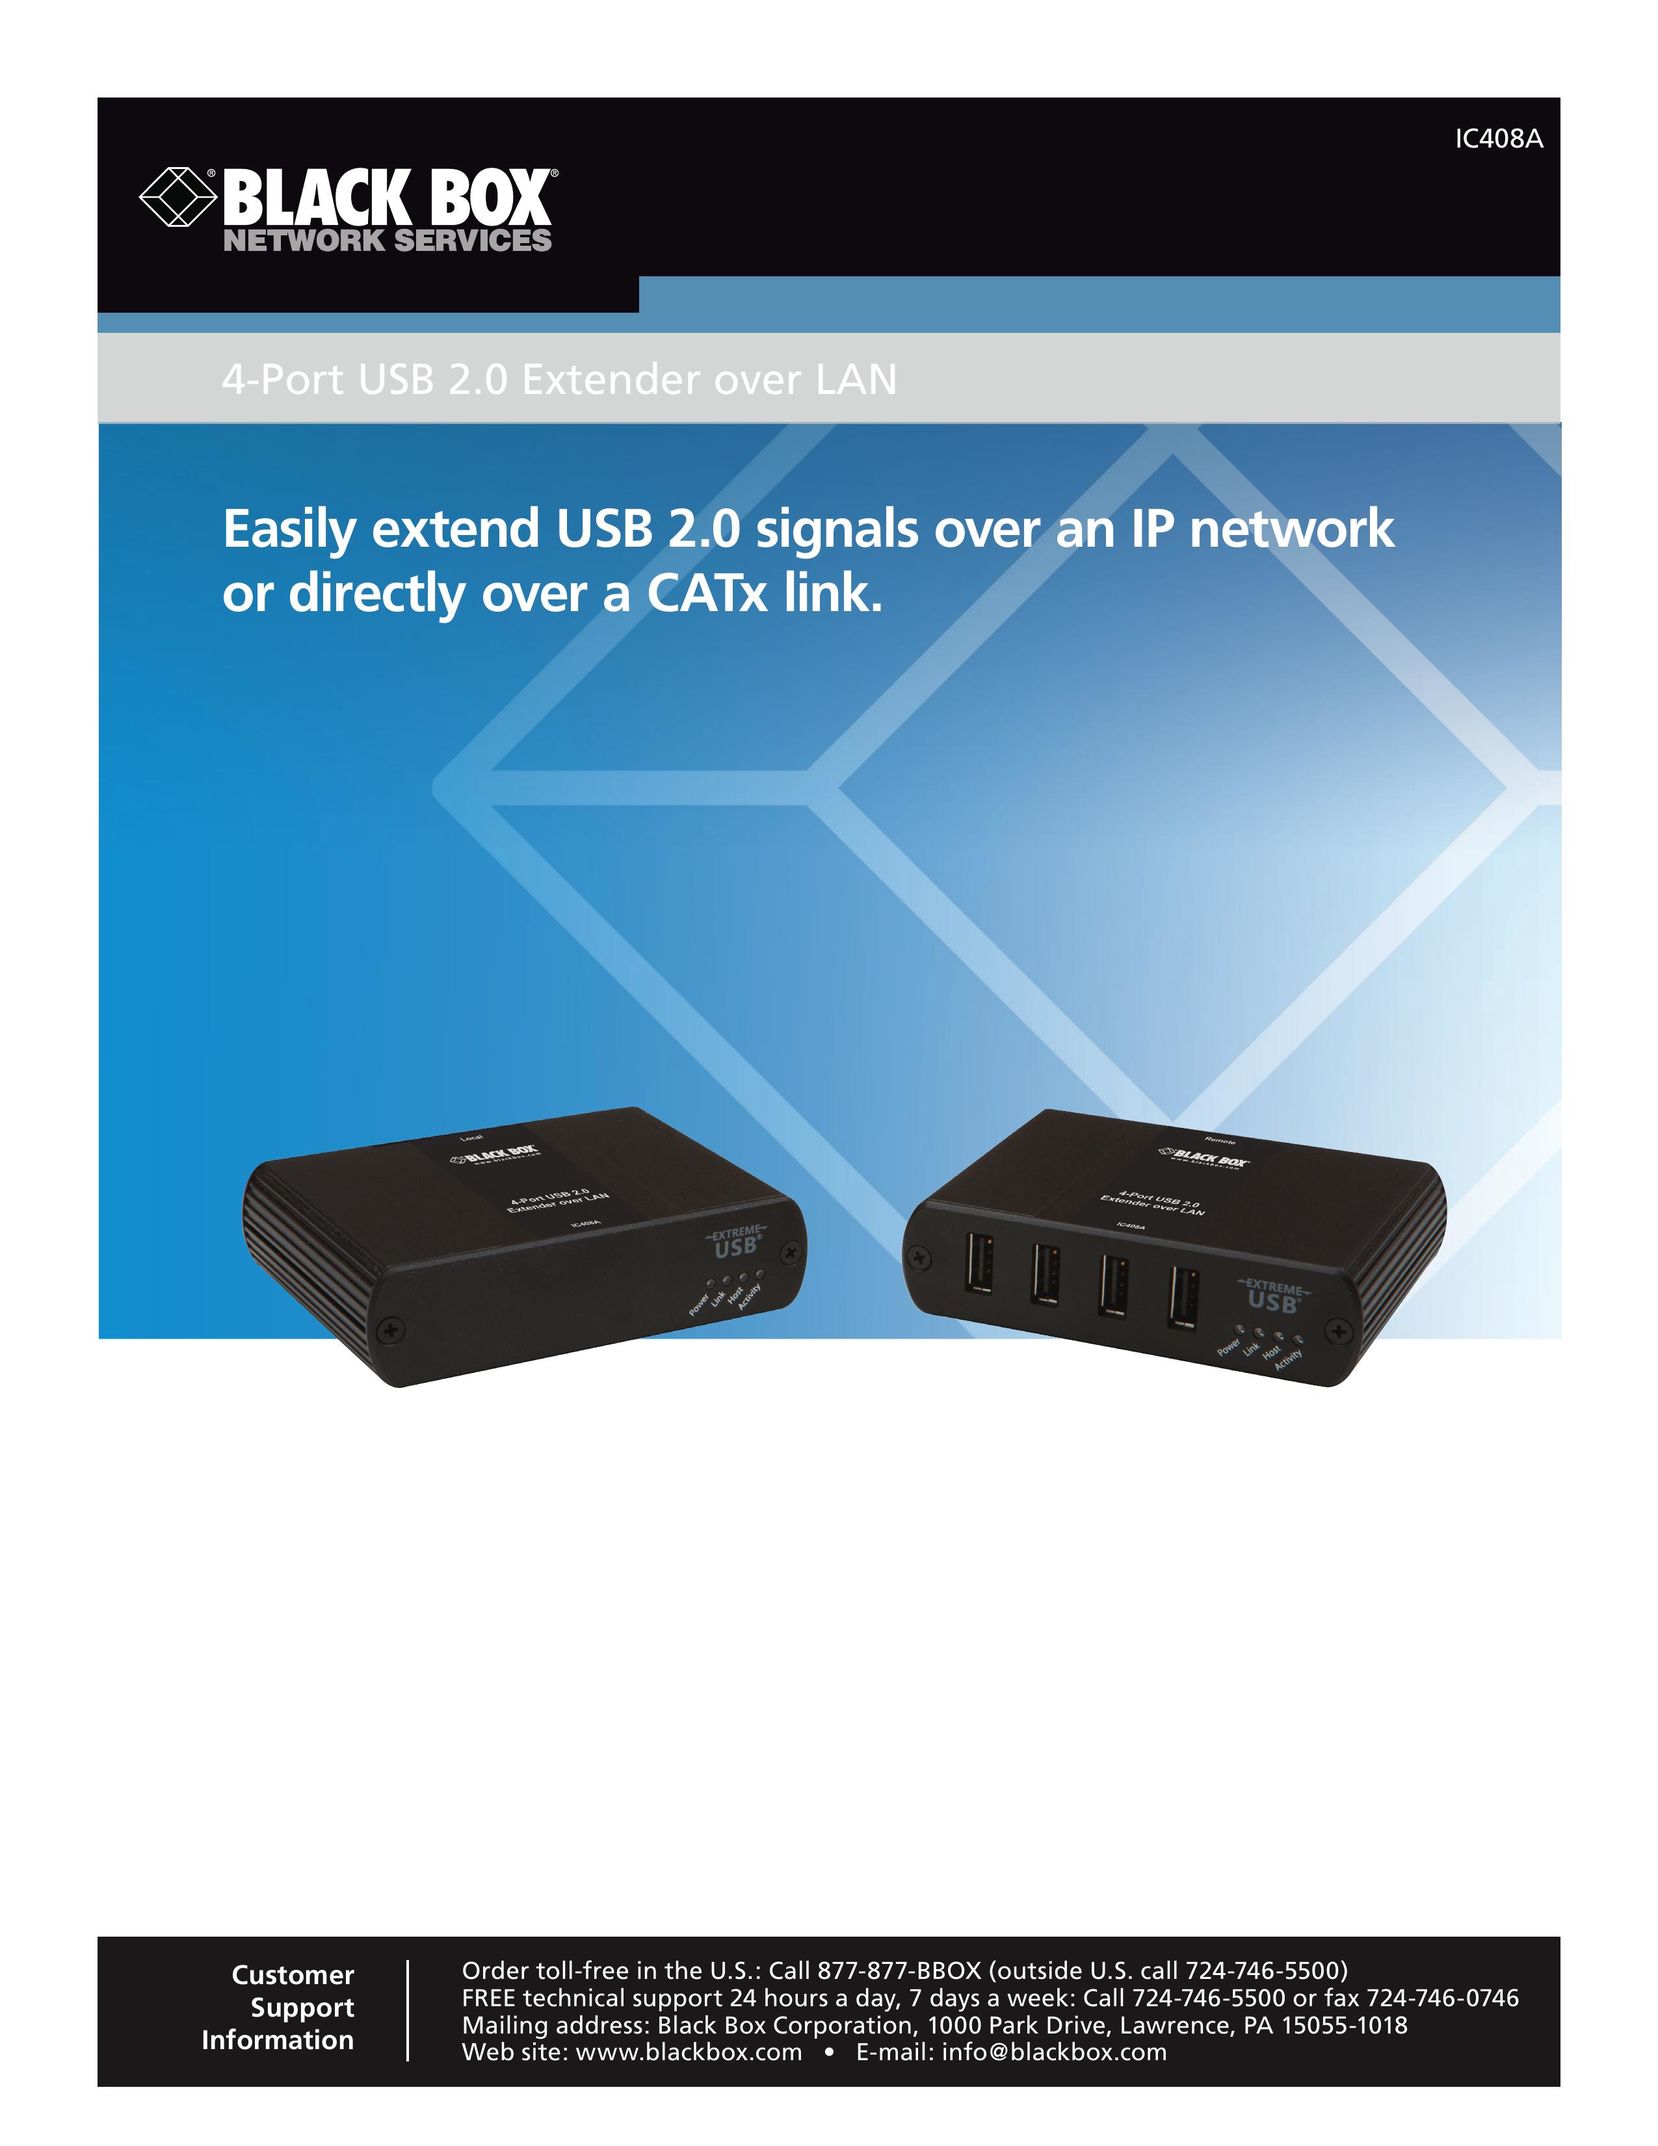 Black Box IC408A Router User Manual